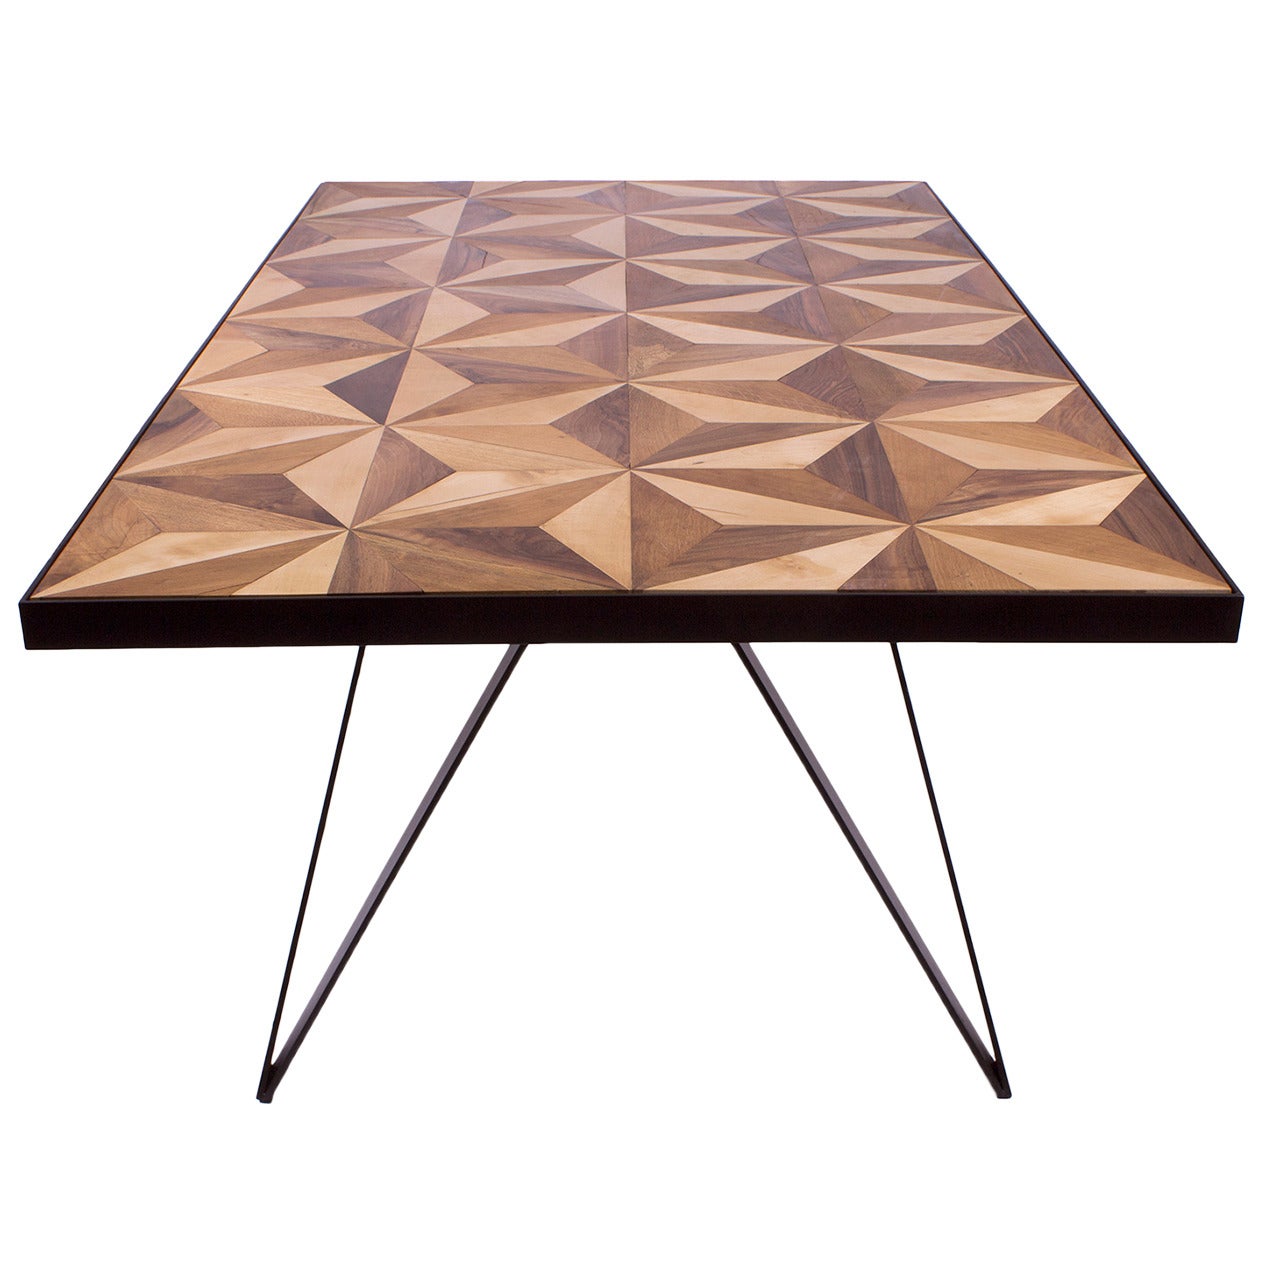 Four to the Floor - Limited Edition Table by Francois Gustin for Spolia For Sale